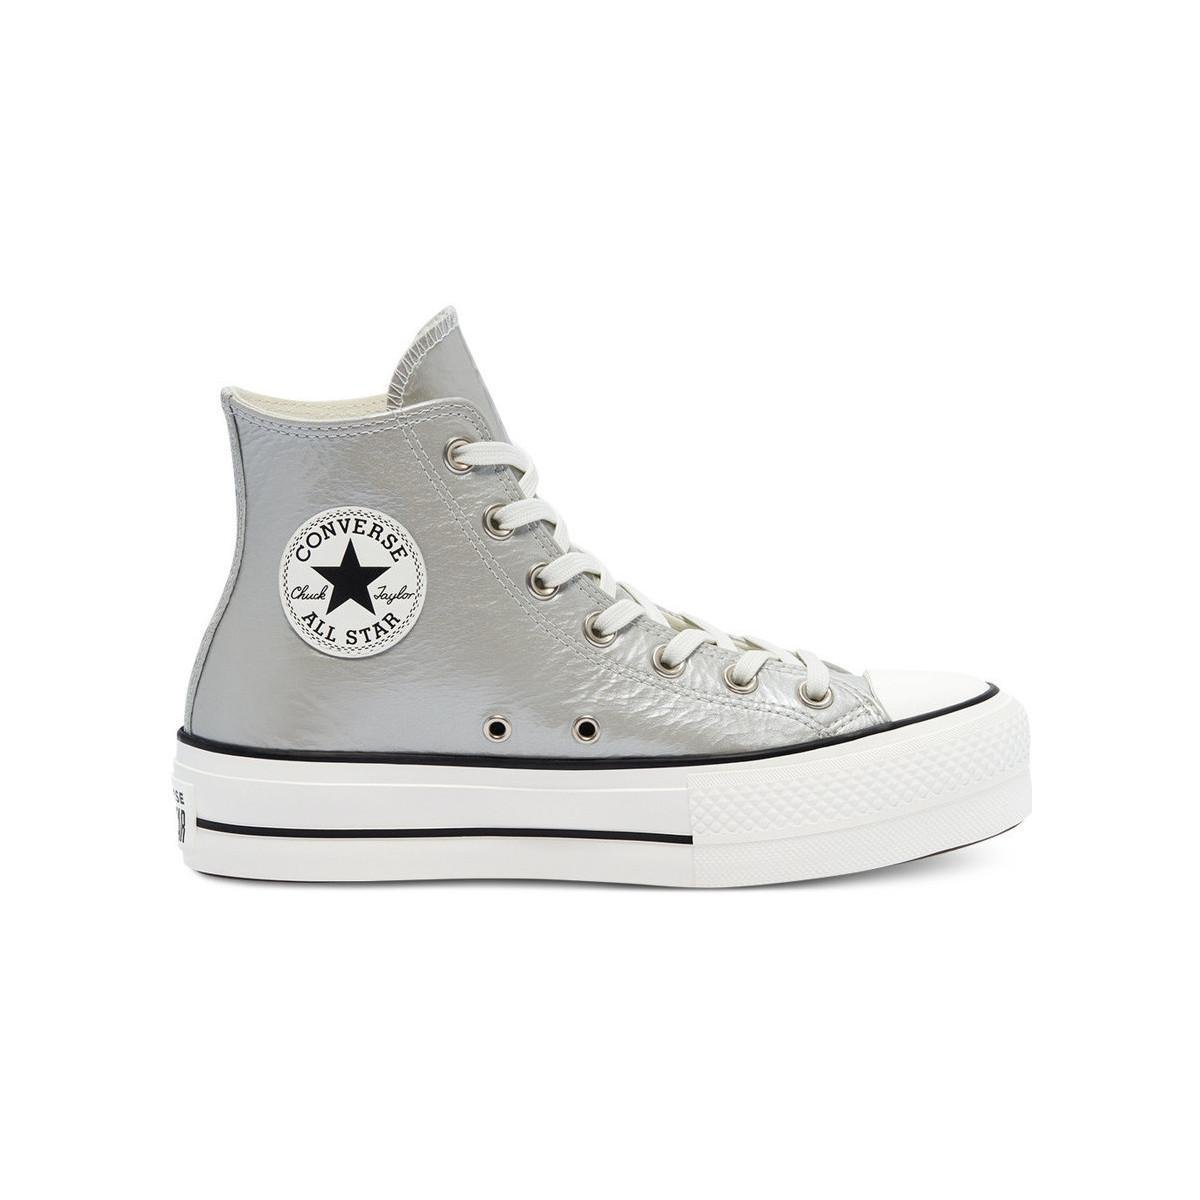 Converse Montante Compensee Cheapest Buy, 43% OFF | evanstoncinci.org